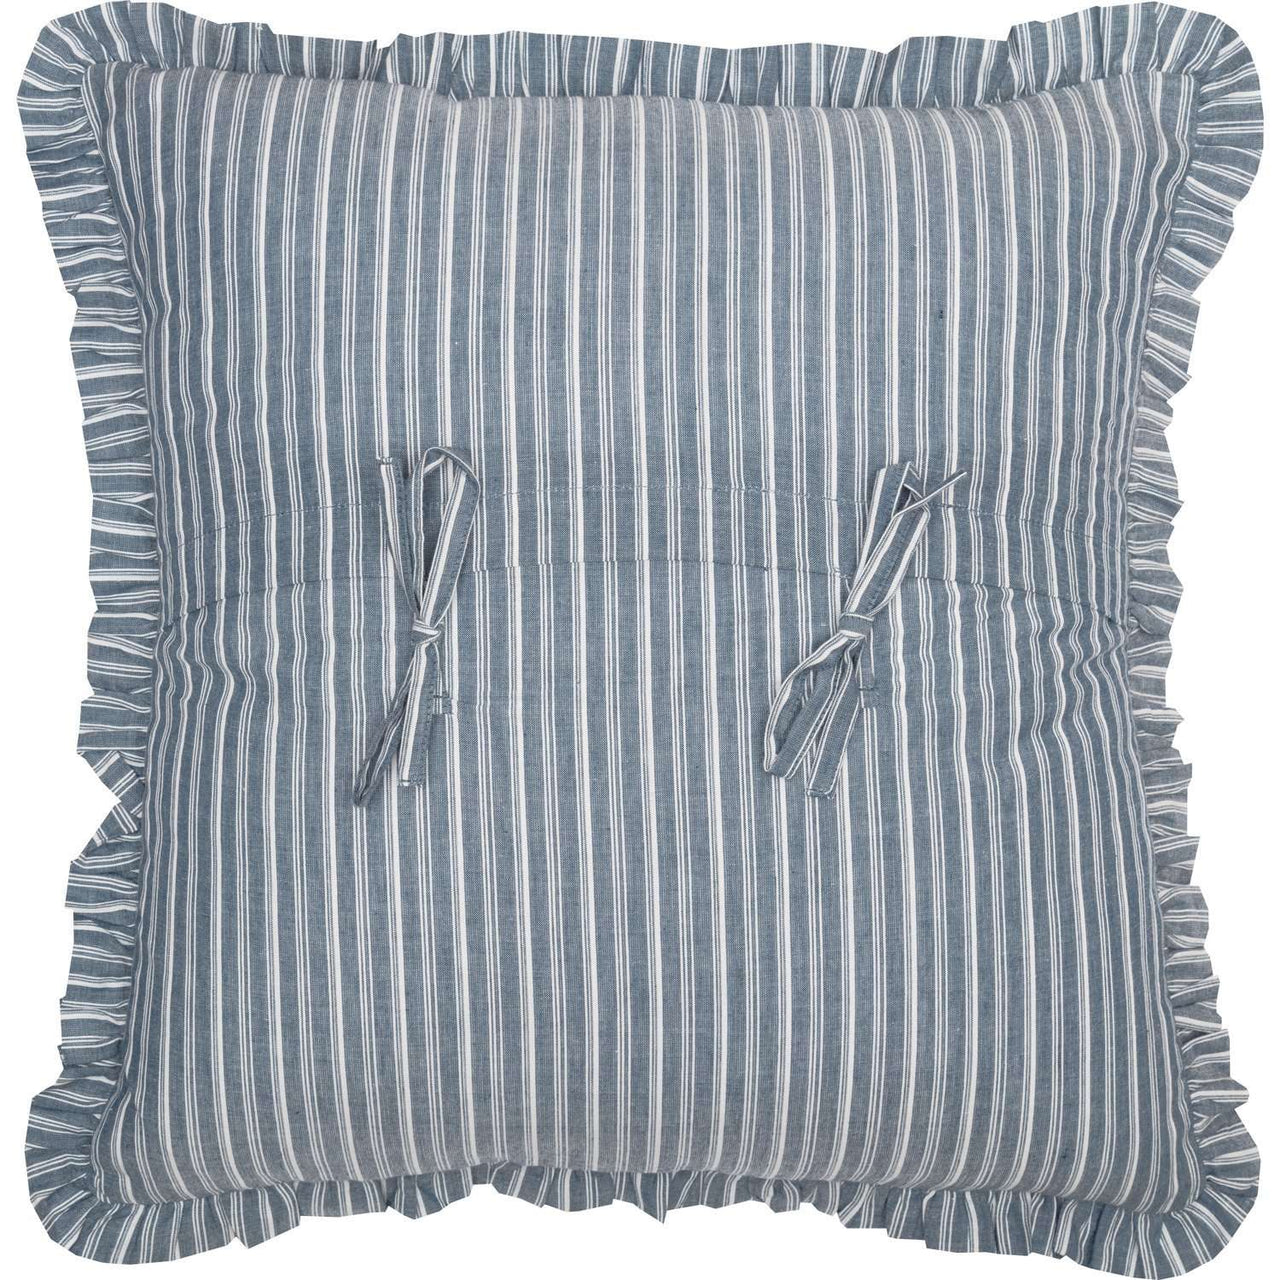 Sawyer Mill Charcoal Windmill Pillow Blue, Charcoal, Red Bedding VHC Brands 